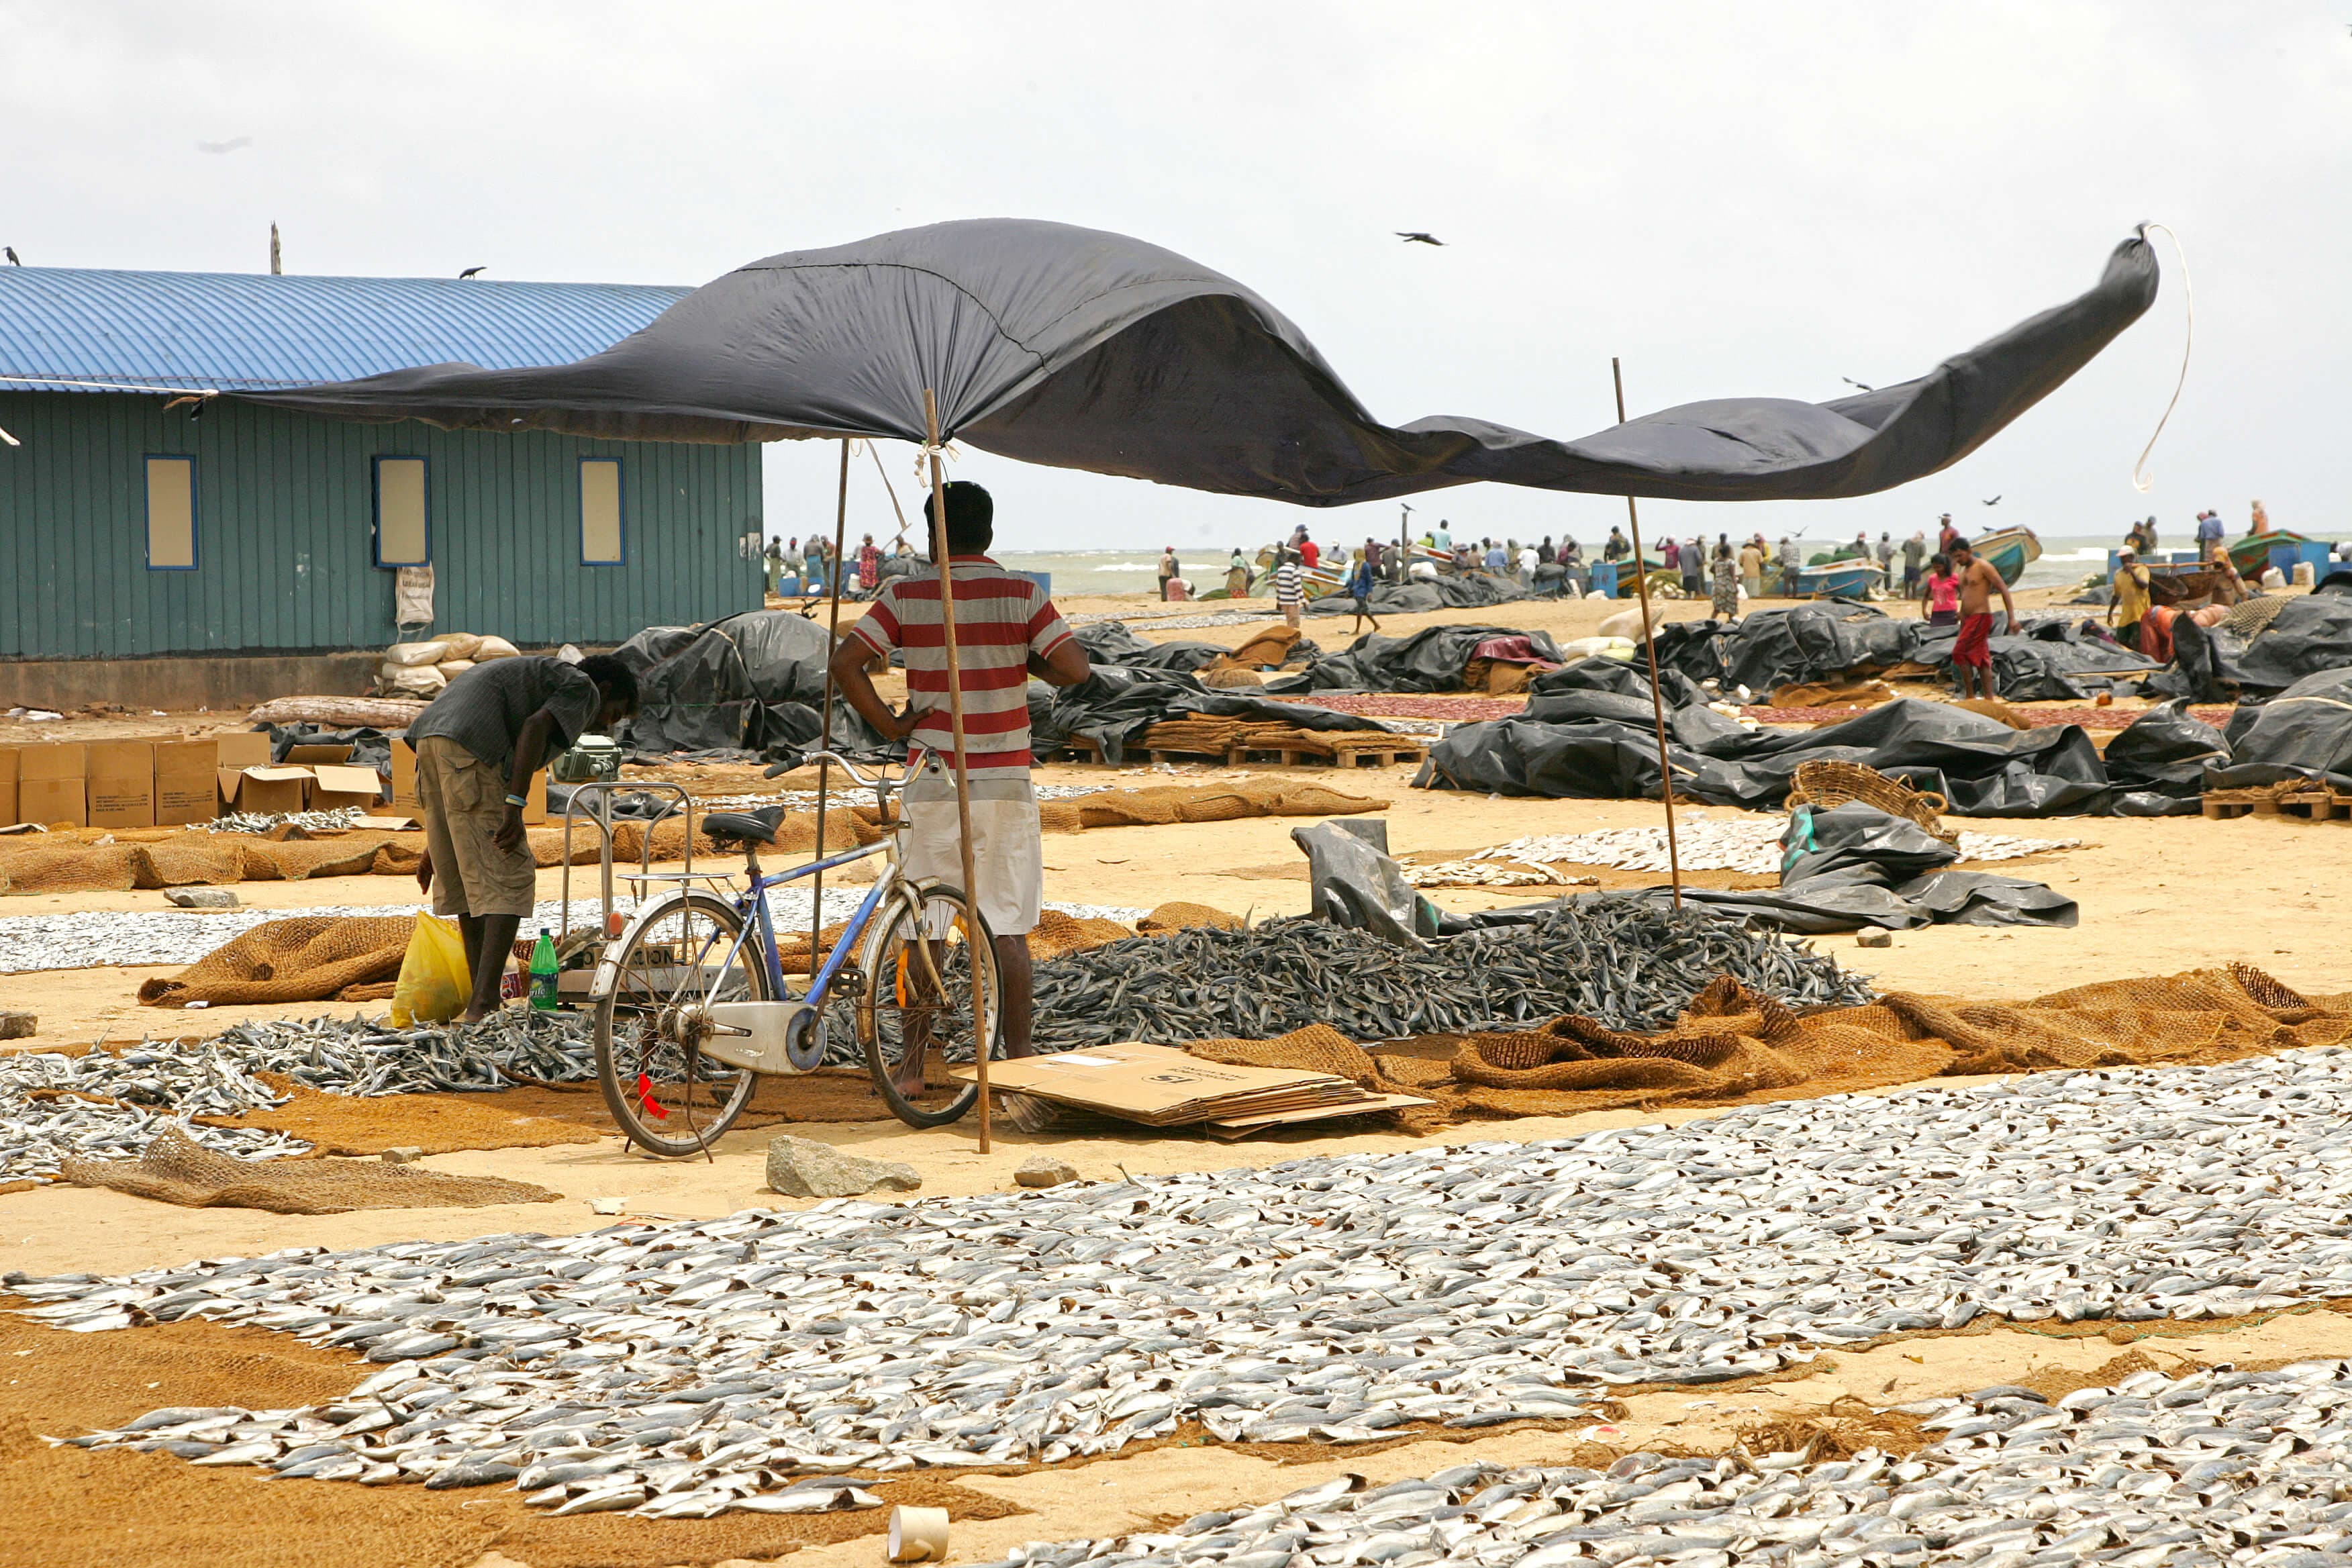 A view of making salty fishes in Negombo beach Sri Lanka